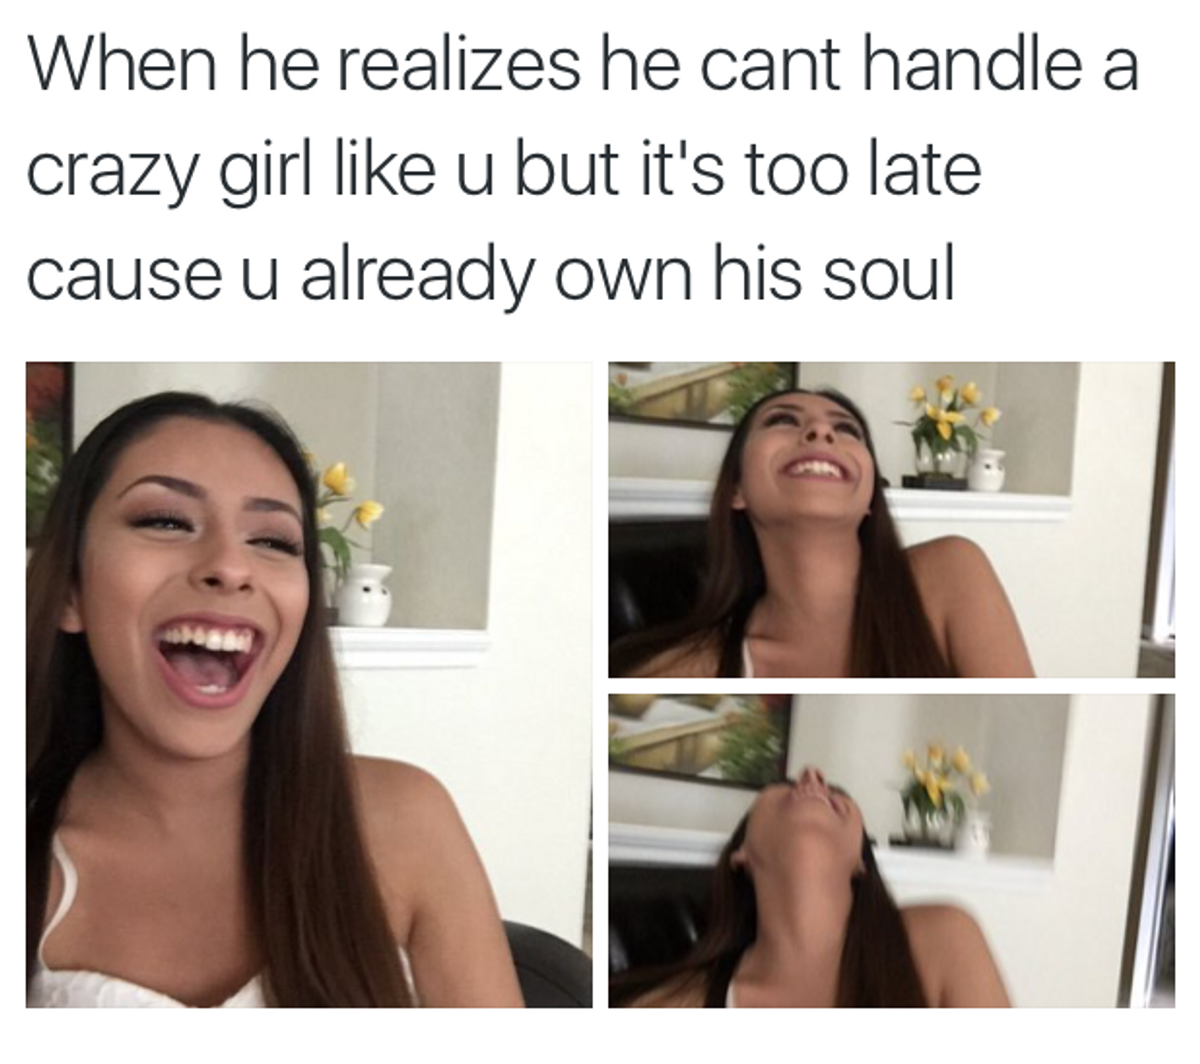 Quit It With The "Crazy Girlfriend" Act